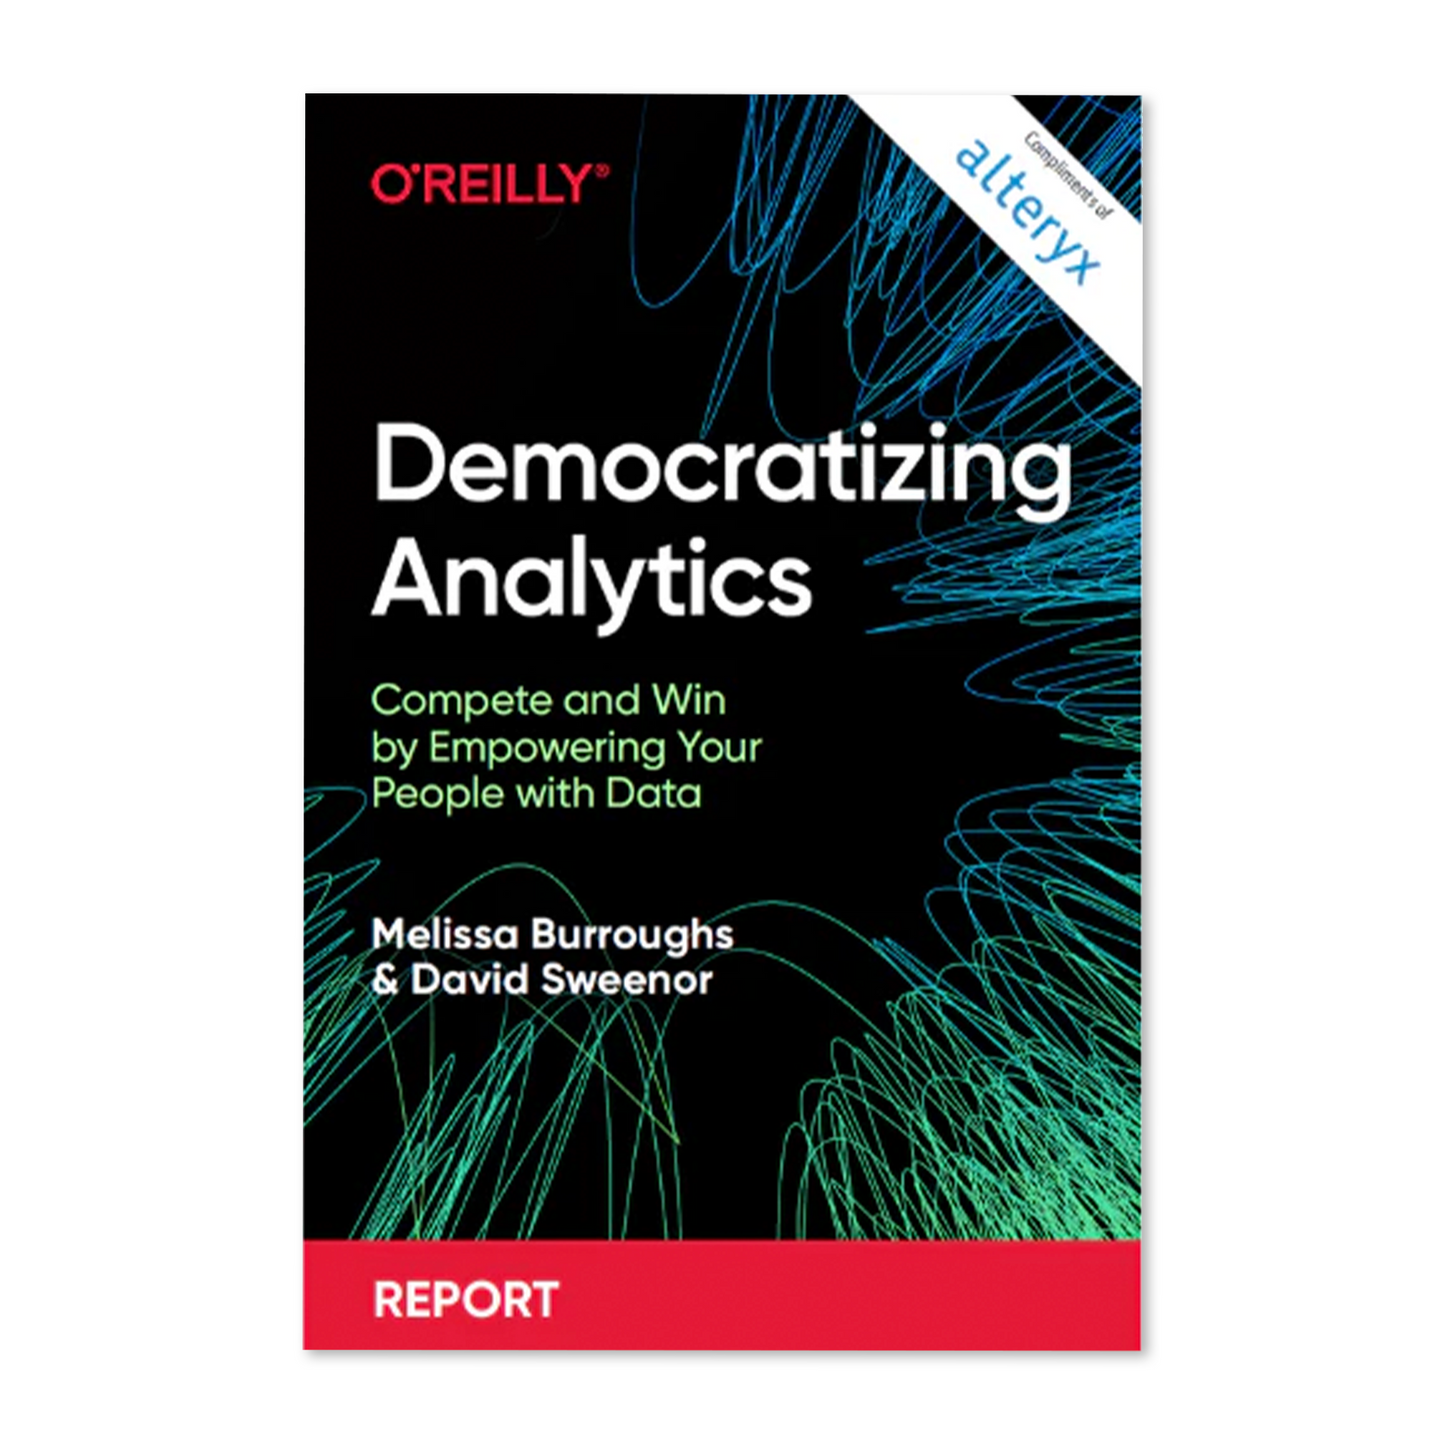 Democratizing Analytics: Compete and Win by Empowering Your People with Data